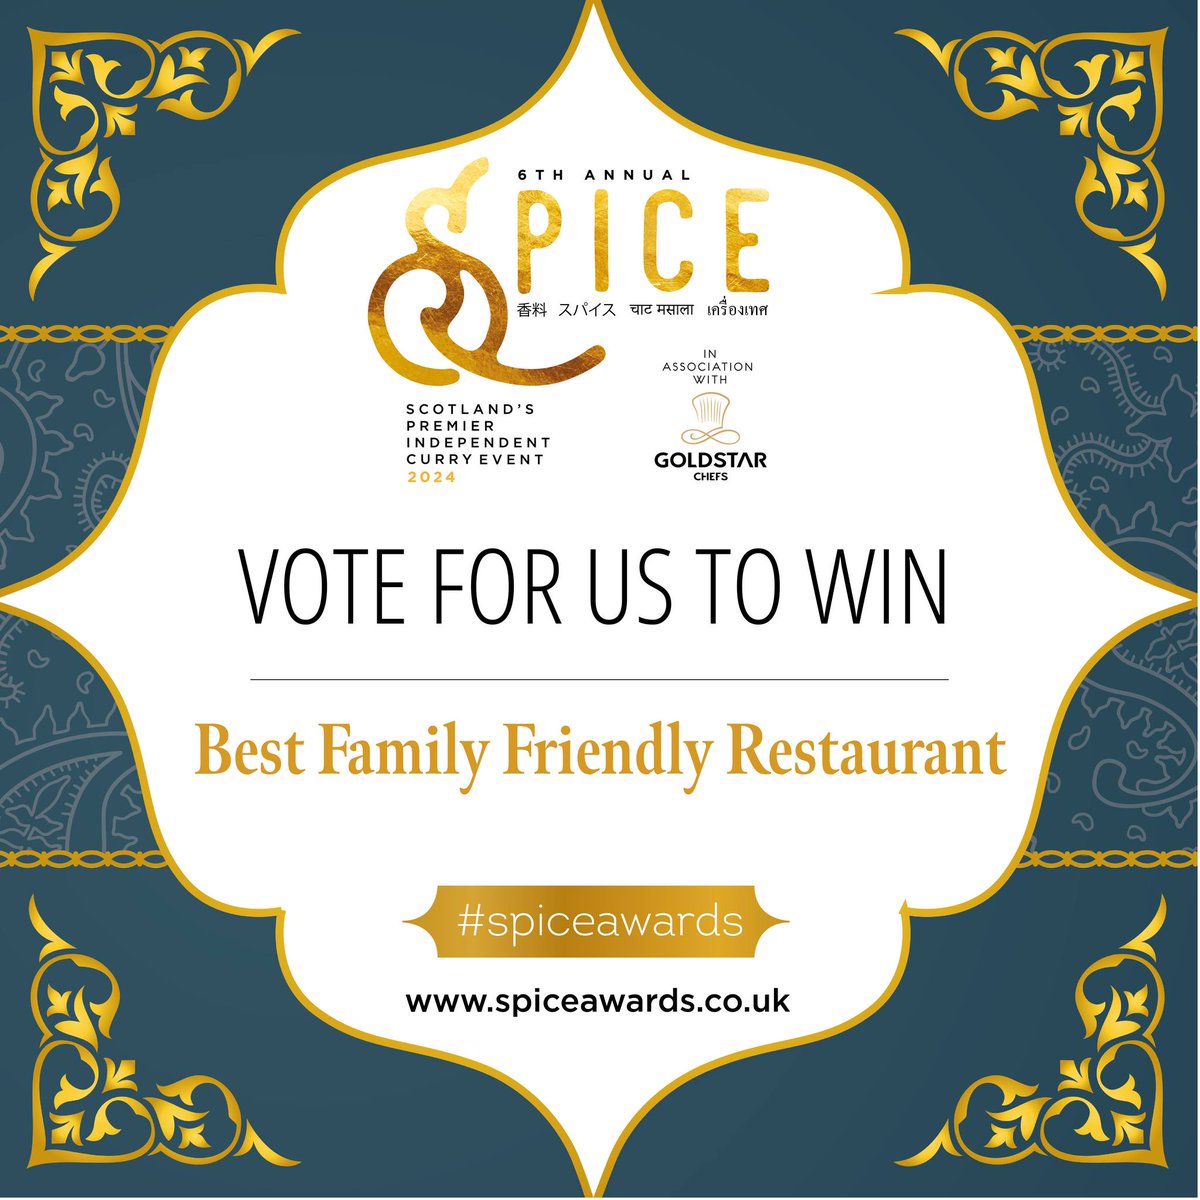 DEAR CUSTOMERS,

Vote For Us 'THE KURRY LOUNGE' (Hamilton) 🏣 as the BEST INDIAN RESTAURANT, BEST INDIAN TAKEAWAY, BEST FAMILY FRIENDLY RESTAURANT, BEST TEAM

VOTE FOR US USING THE LINK BELOW 👇 
forms.gle/9cyv798fQHwBKs…
#voteforus #bestindianrestaurant #bestteam